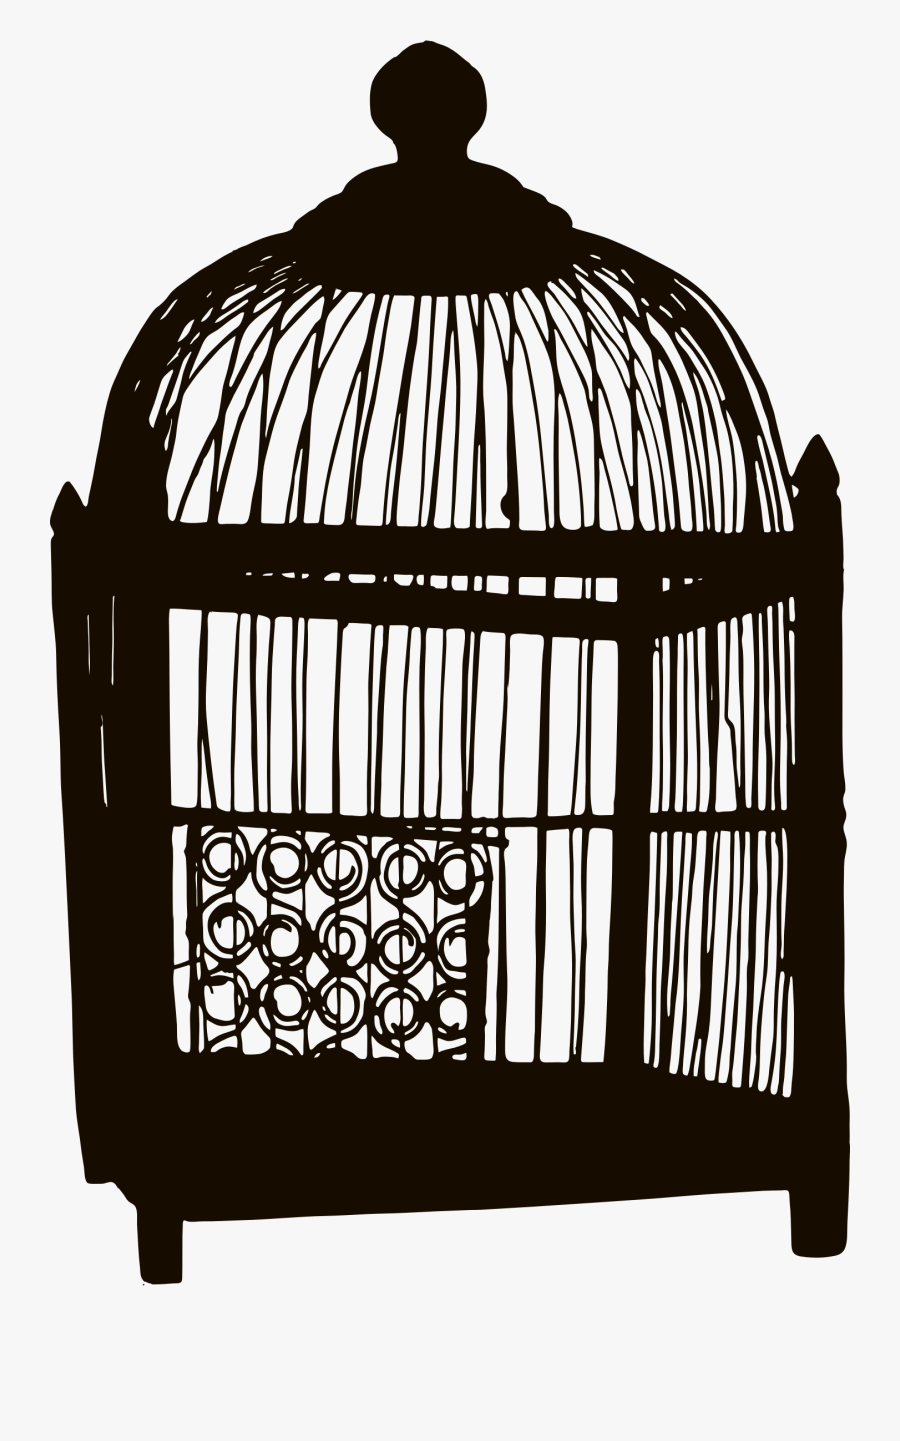 Transparent Background Bird In A Cage Png, Transparent Clipart